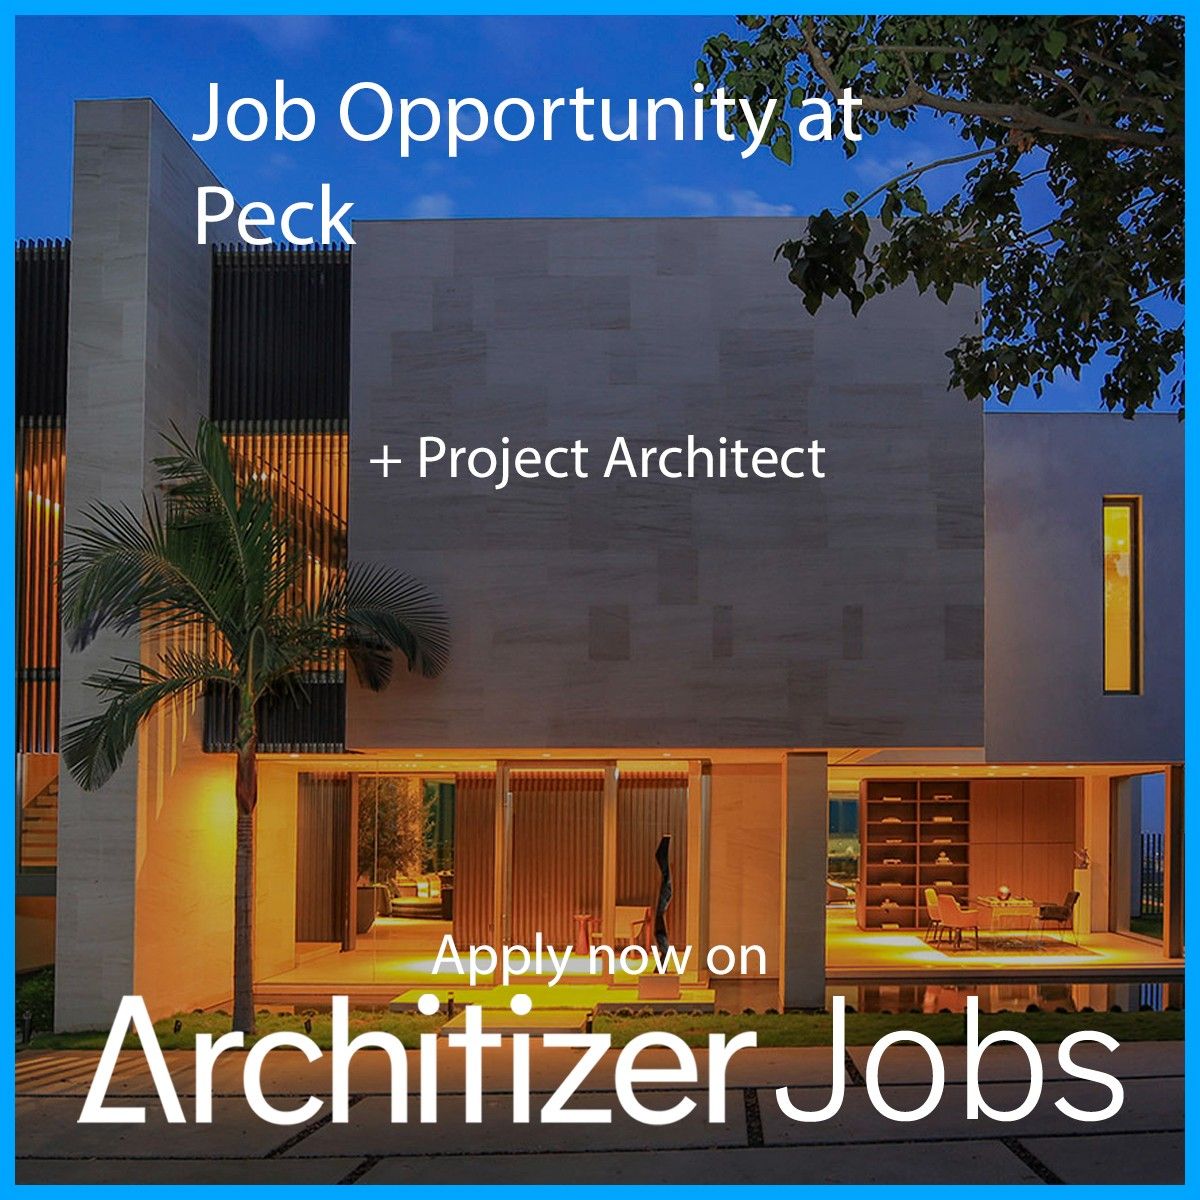 NEW JOB OPPORTUNITY: PECK is an established architecture, civil engineering and structural engineering firm based in the Playhouse District of Pasadena. Read more & apply here: arc.ht/37Gqtzw
.
.
.
#jobsinarchitecture #architecturejobs #designjobs